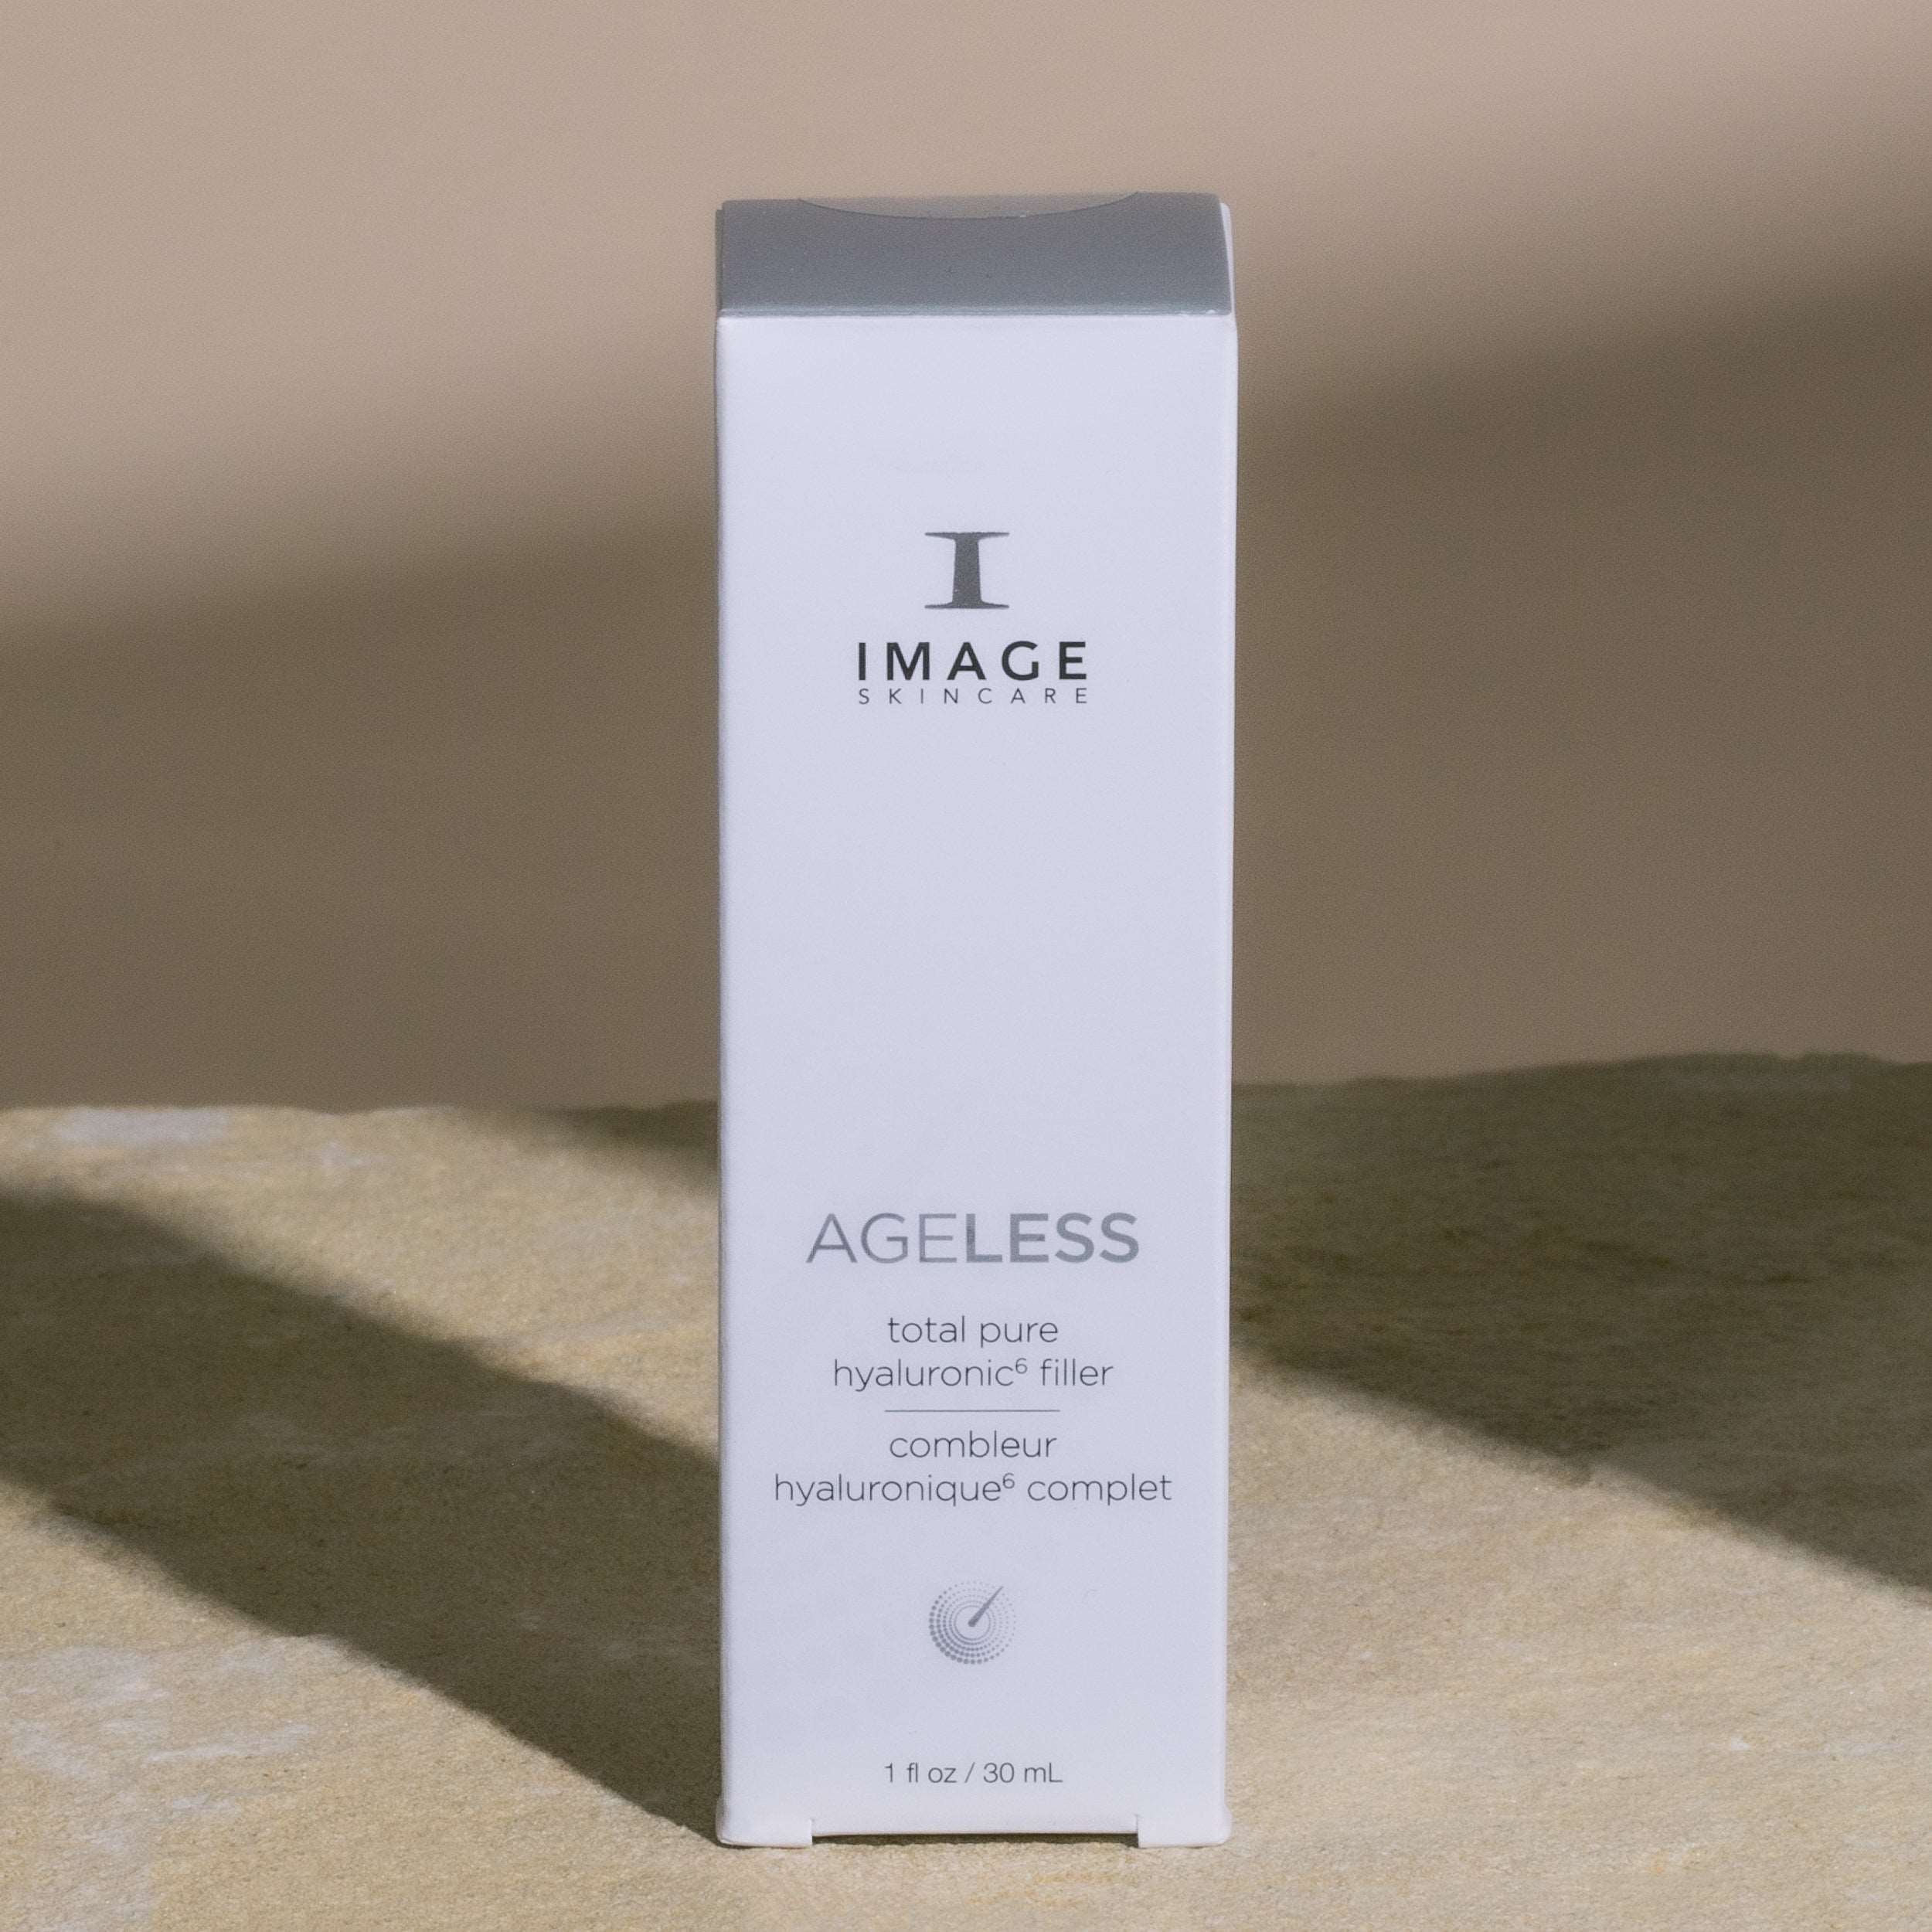 Ageless Total Pure Hyaluronic Filler Image Skincare